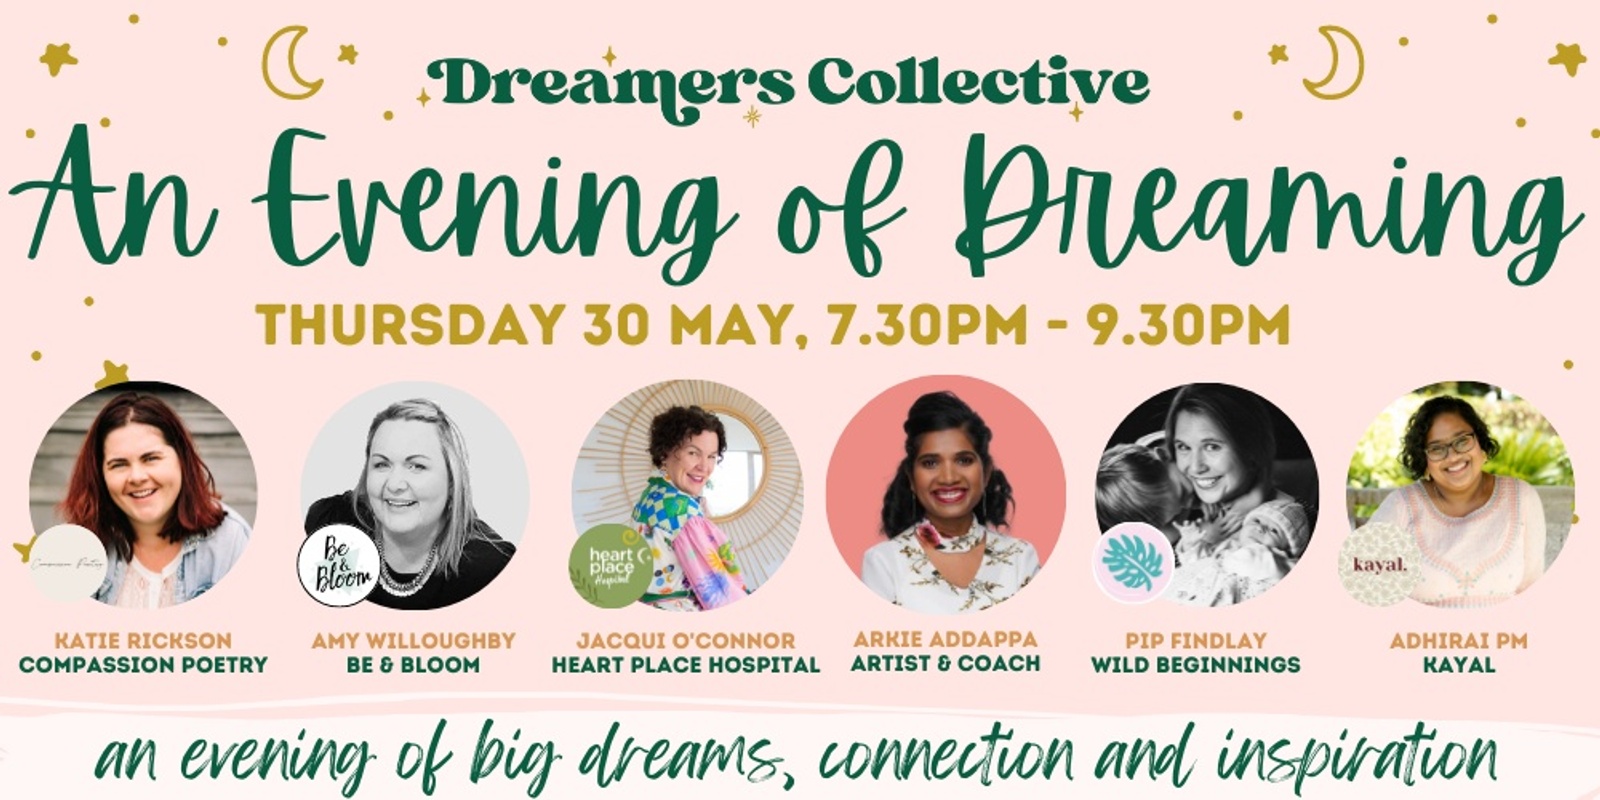 Banner image for An Evening of Dreaming with Dreamers Collective